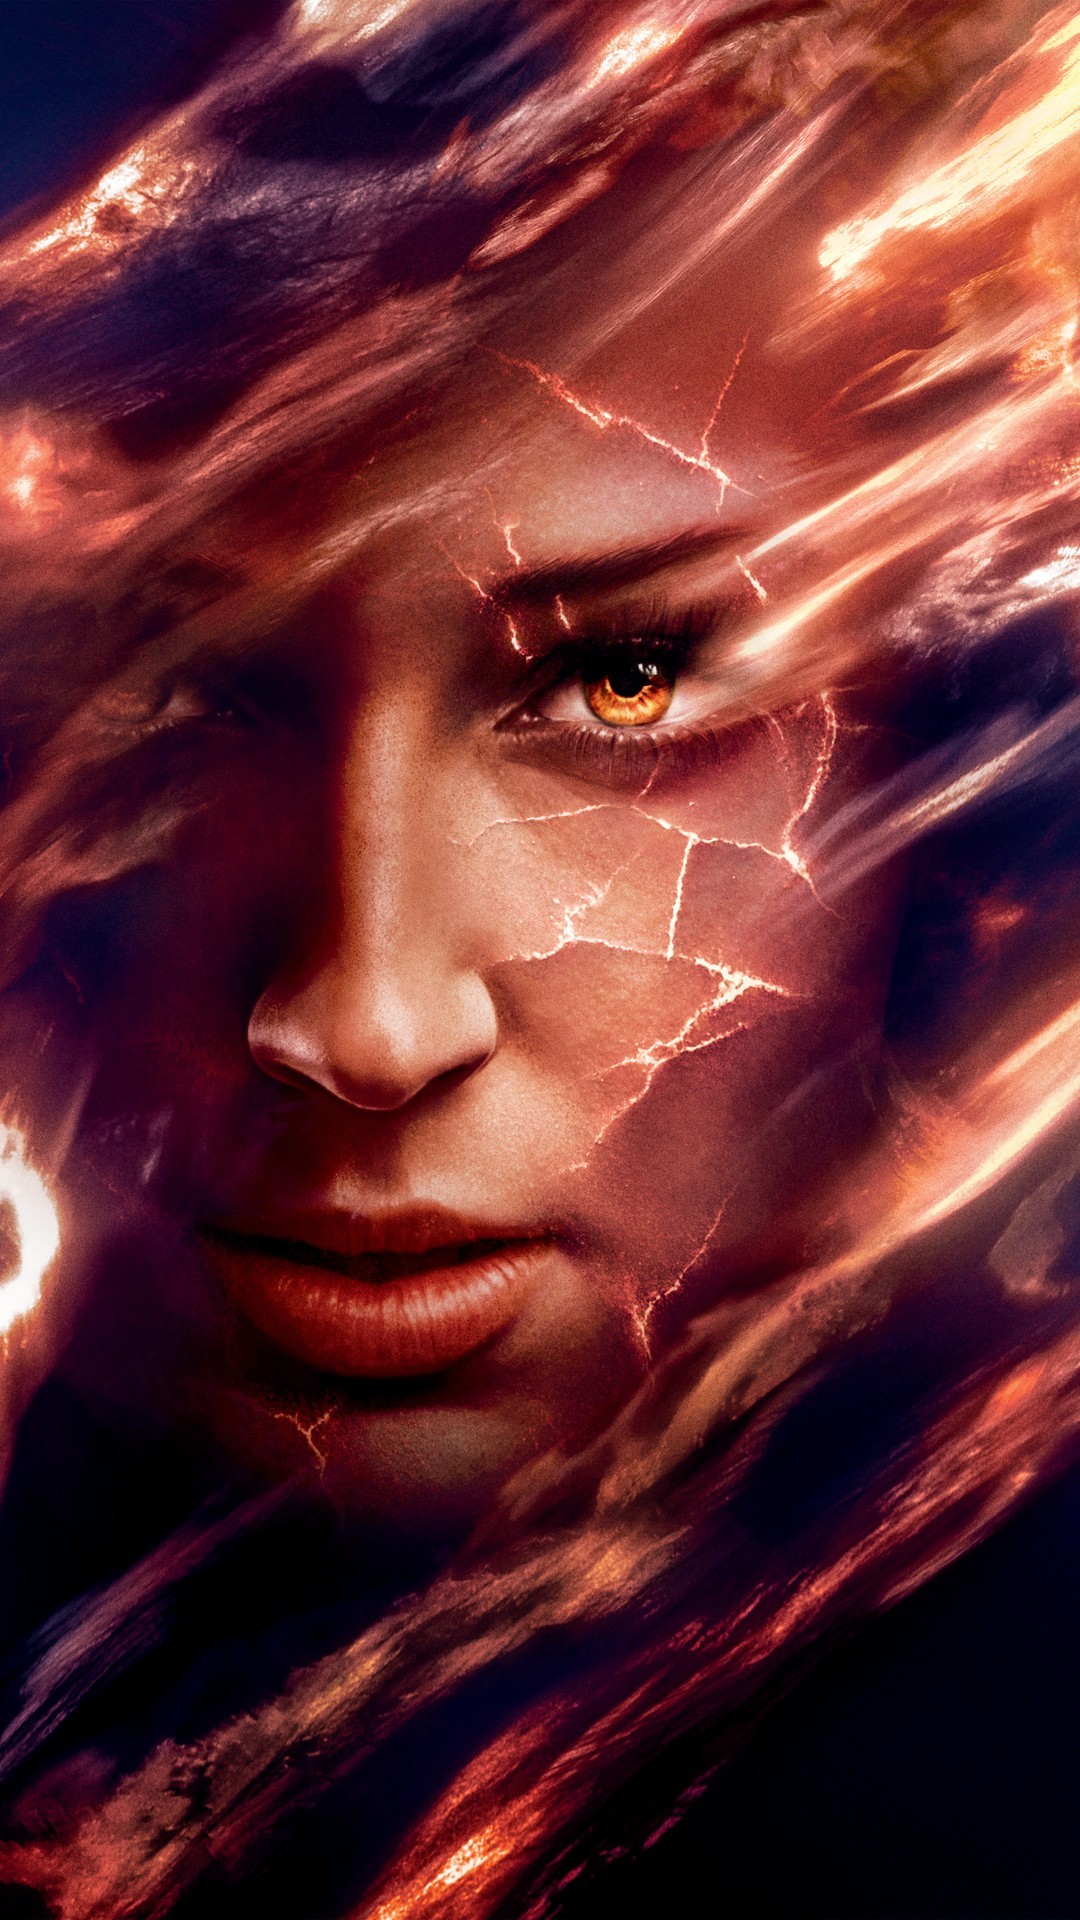 Dark Phoenix 2019 iPhone 7 Wallpaper With high-resolution 1080X1920 pixel. You can use this wallpaper for your iPhone 5, 6, 7, 8, X, XS, XR backgrounds, Mobile Screensaver, or iPad Lock Screen